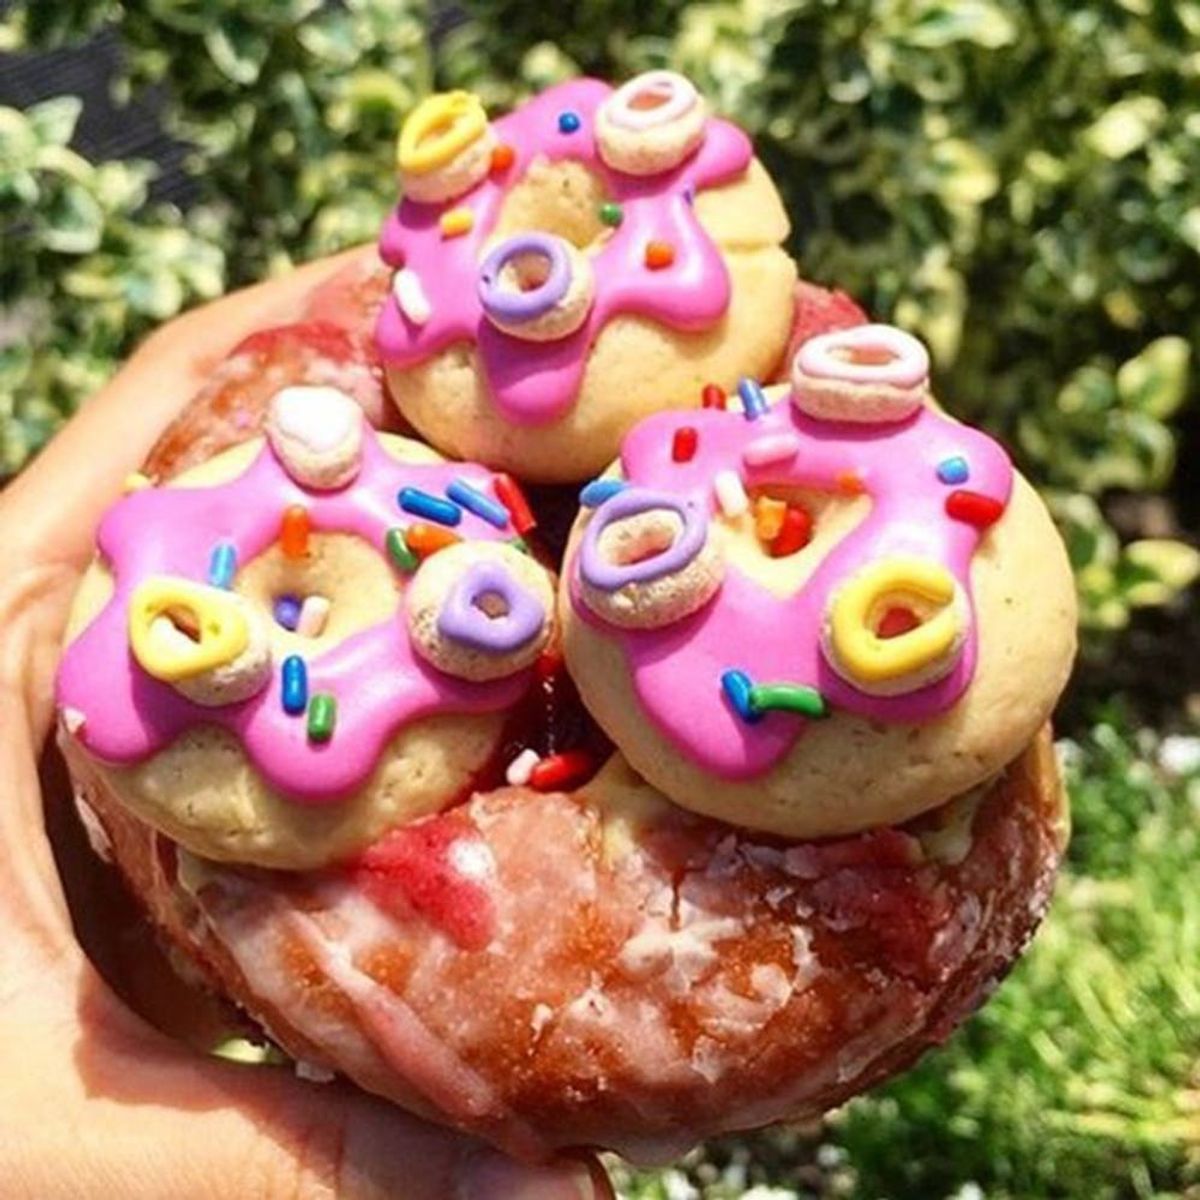 Inception Donuts Are a Thing, and the Internet Is Losing Its Collective Mind